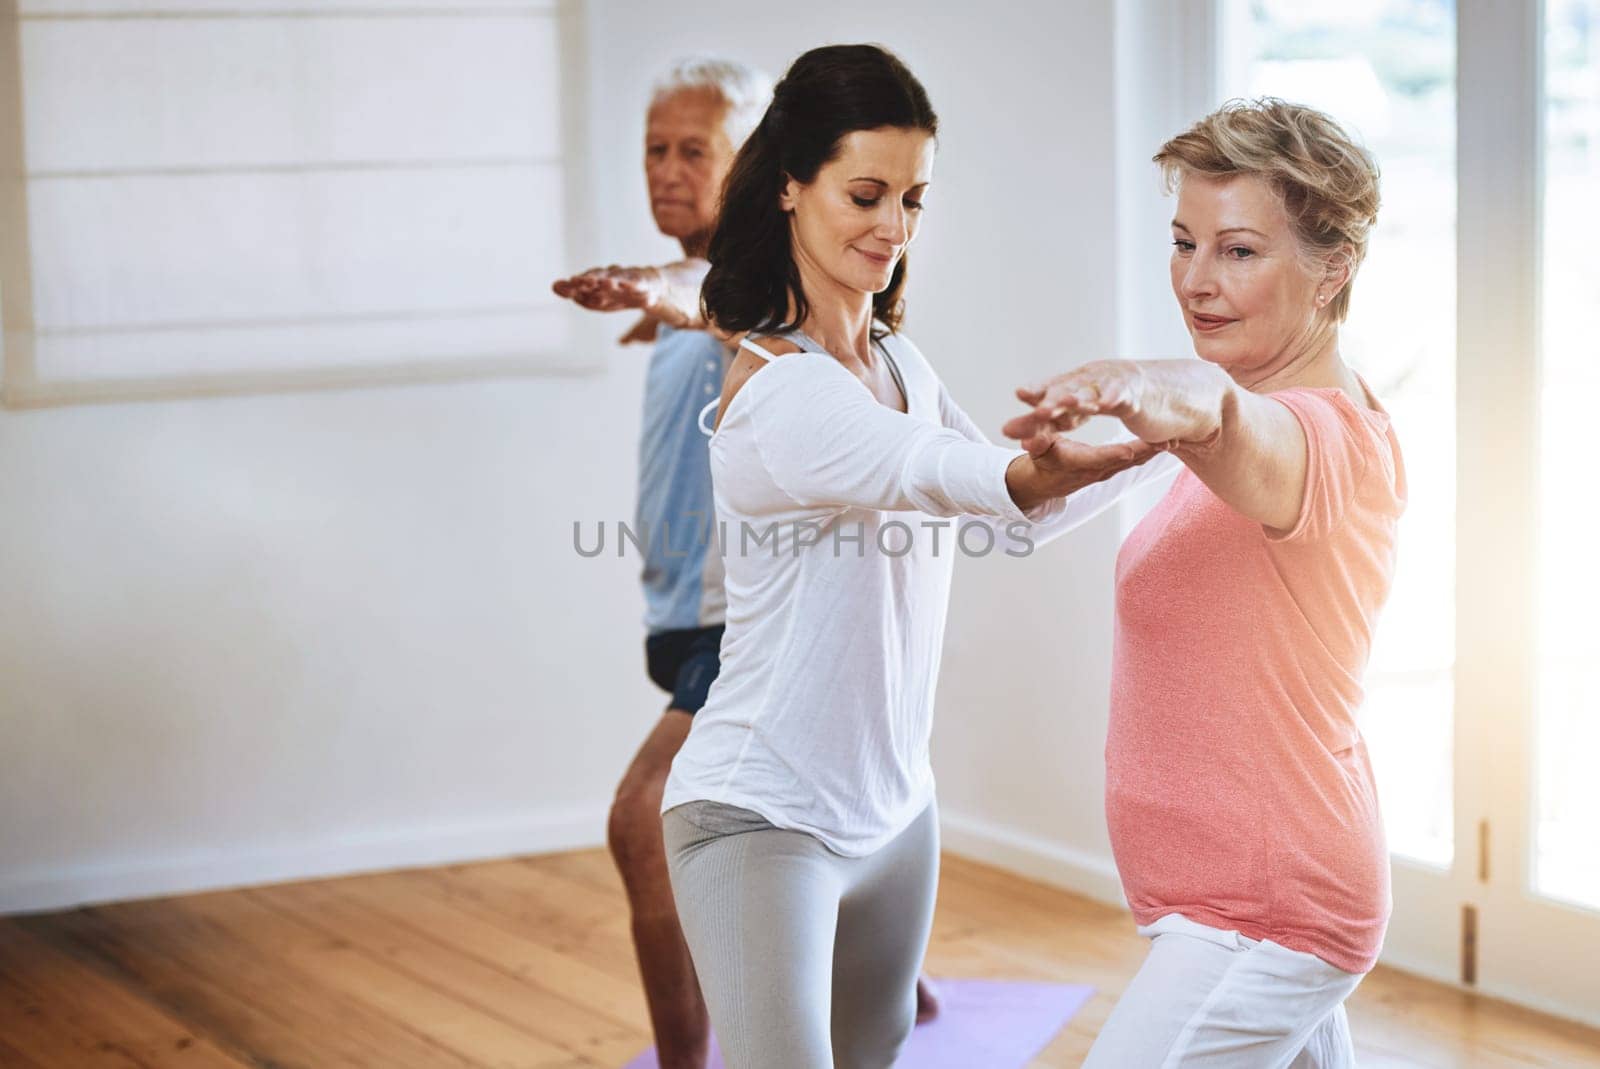 Yoga is their secret to staying fit. a teacher helping a senior woman during a yoga class